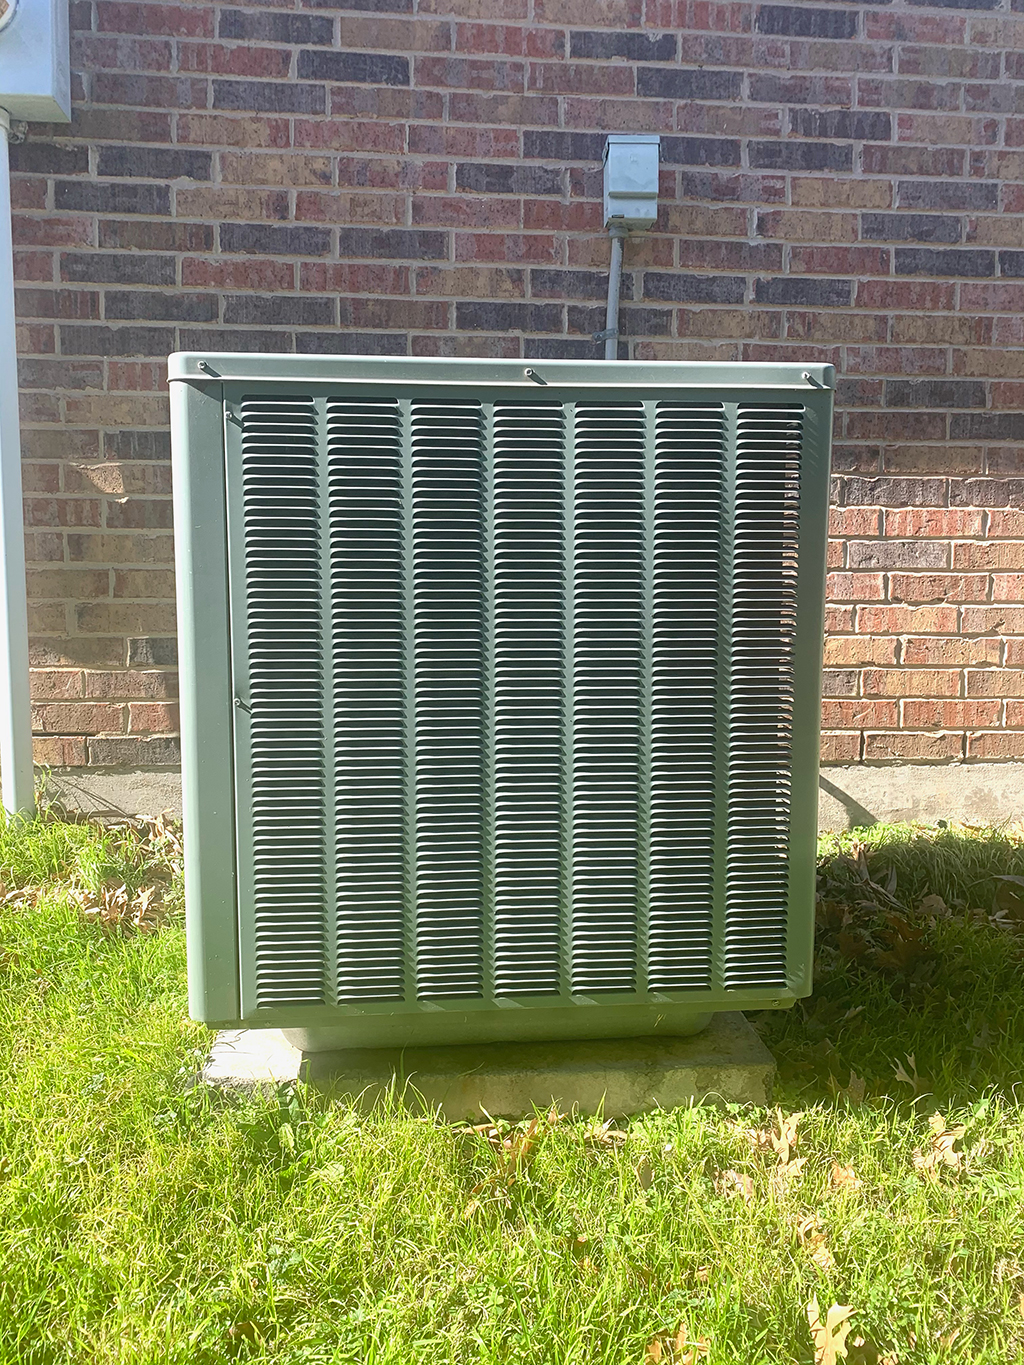 Types Of Air Conditioner Repair | Wylie, TX